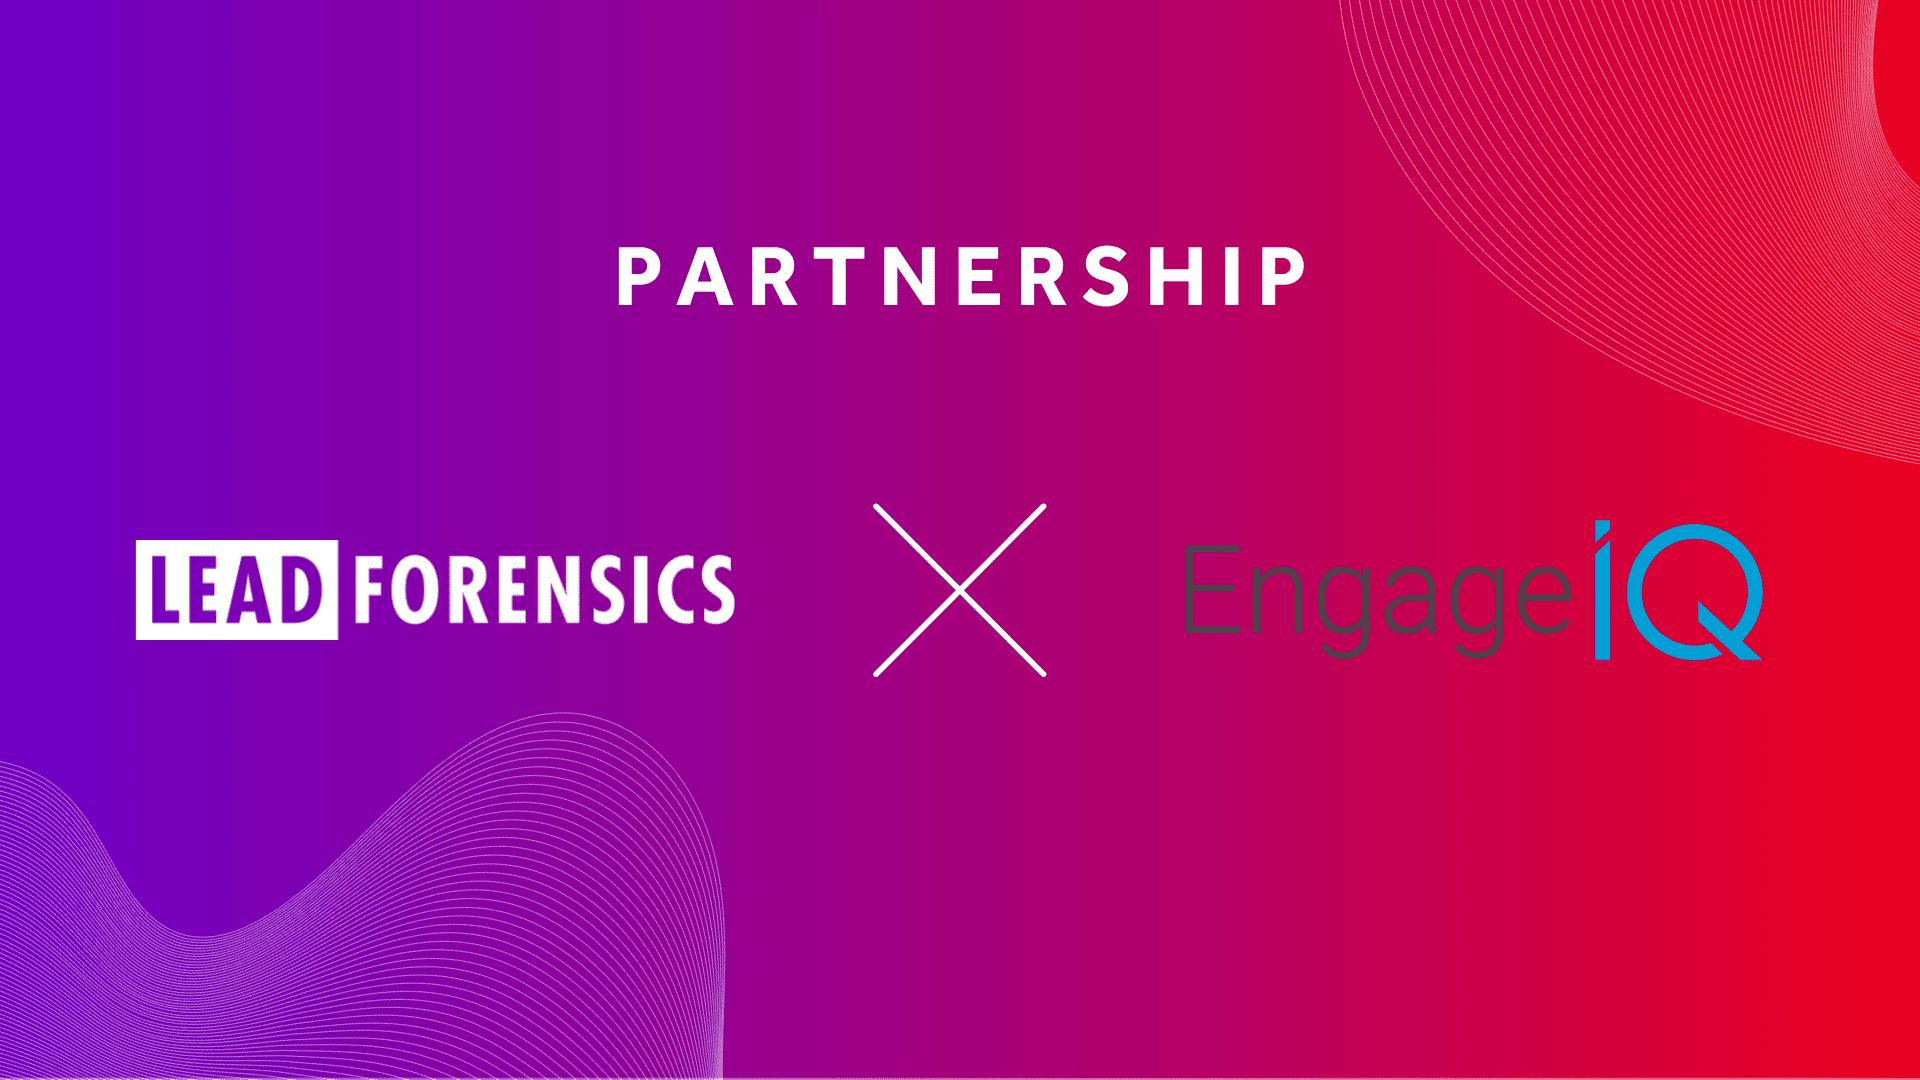 Lead Forensics partner up with EngageTech and EngageIQ to turbo-charge business growth for clients